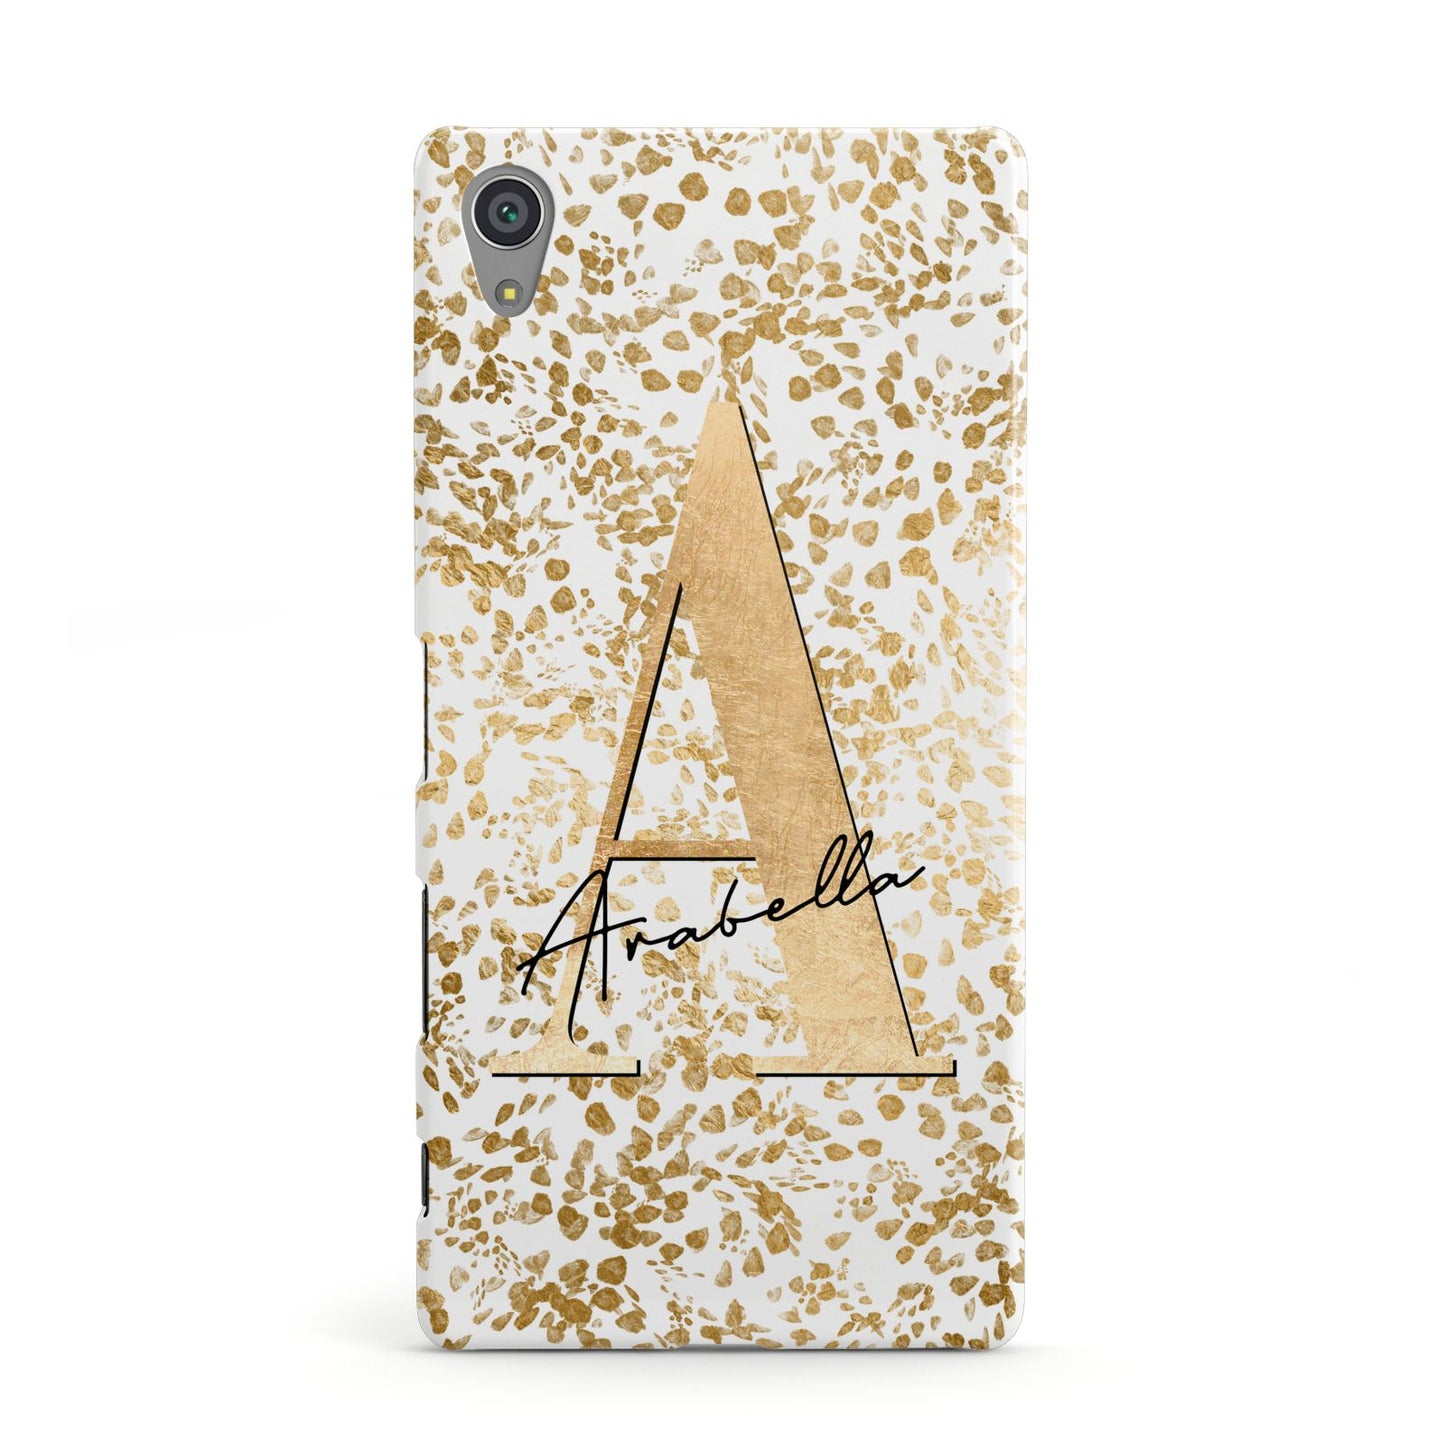 Personalised White Gold Cheetah Sony Xperia Case